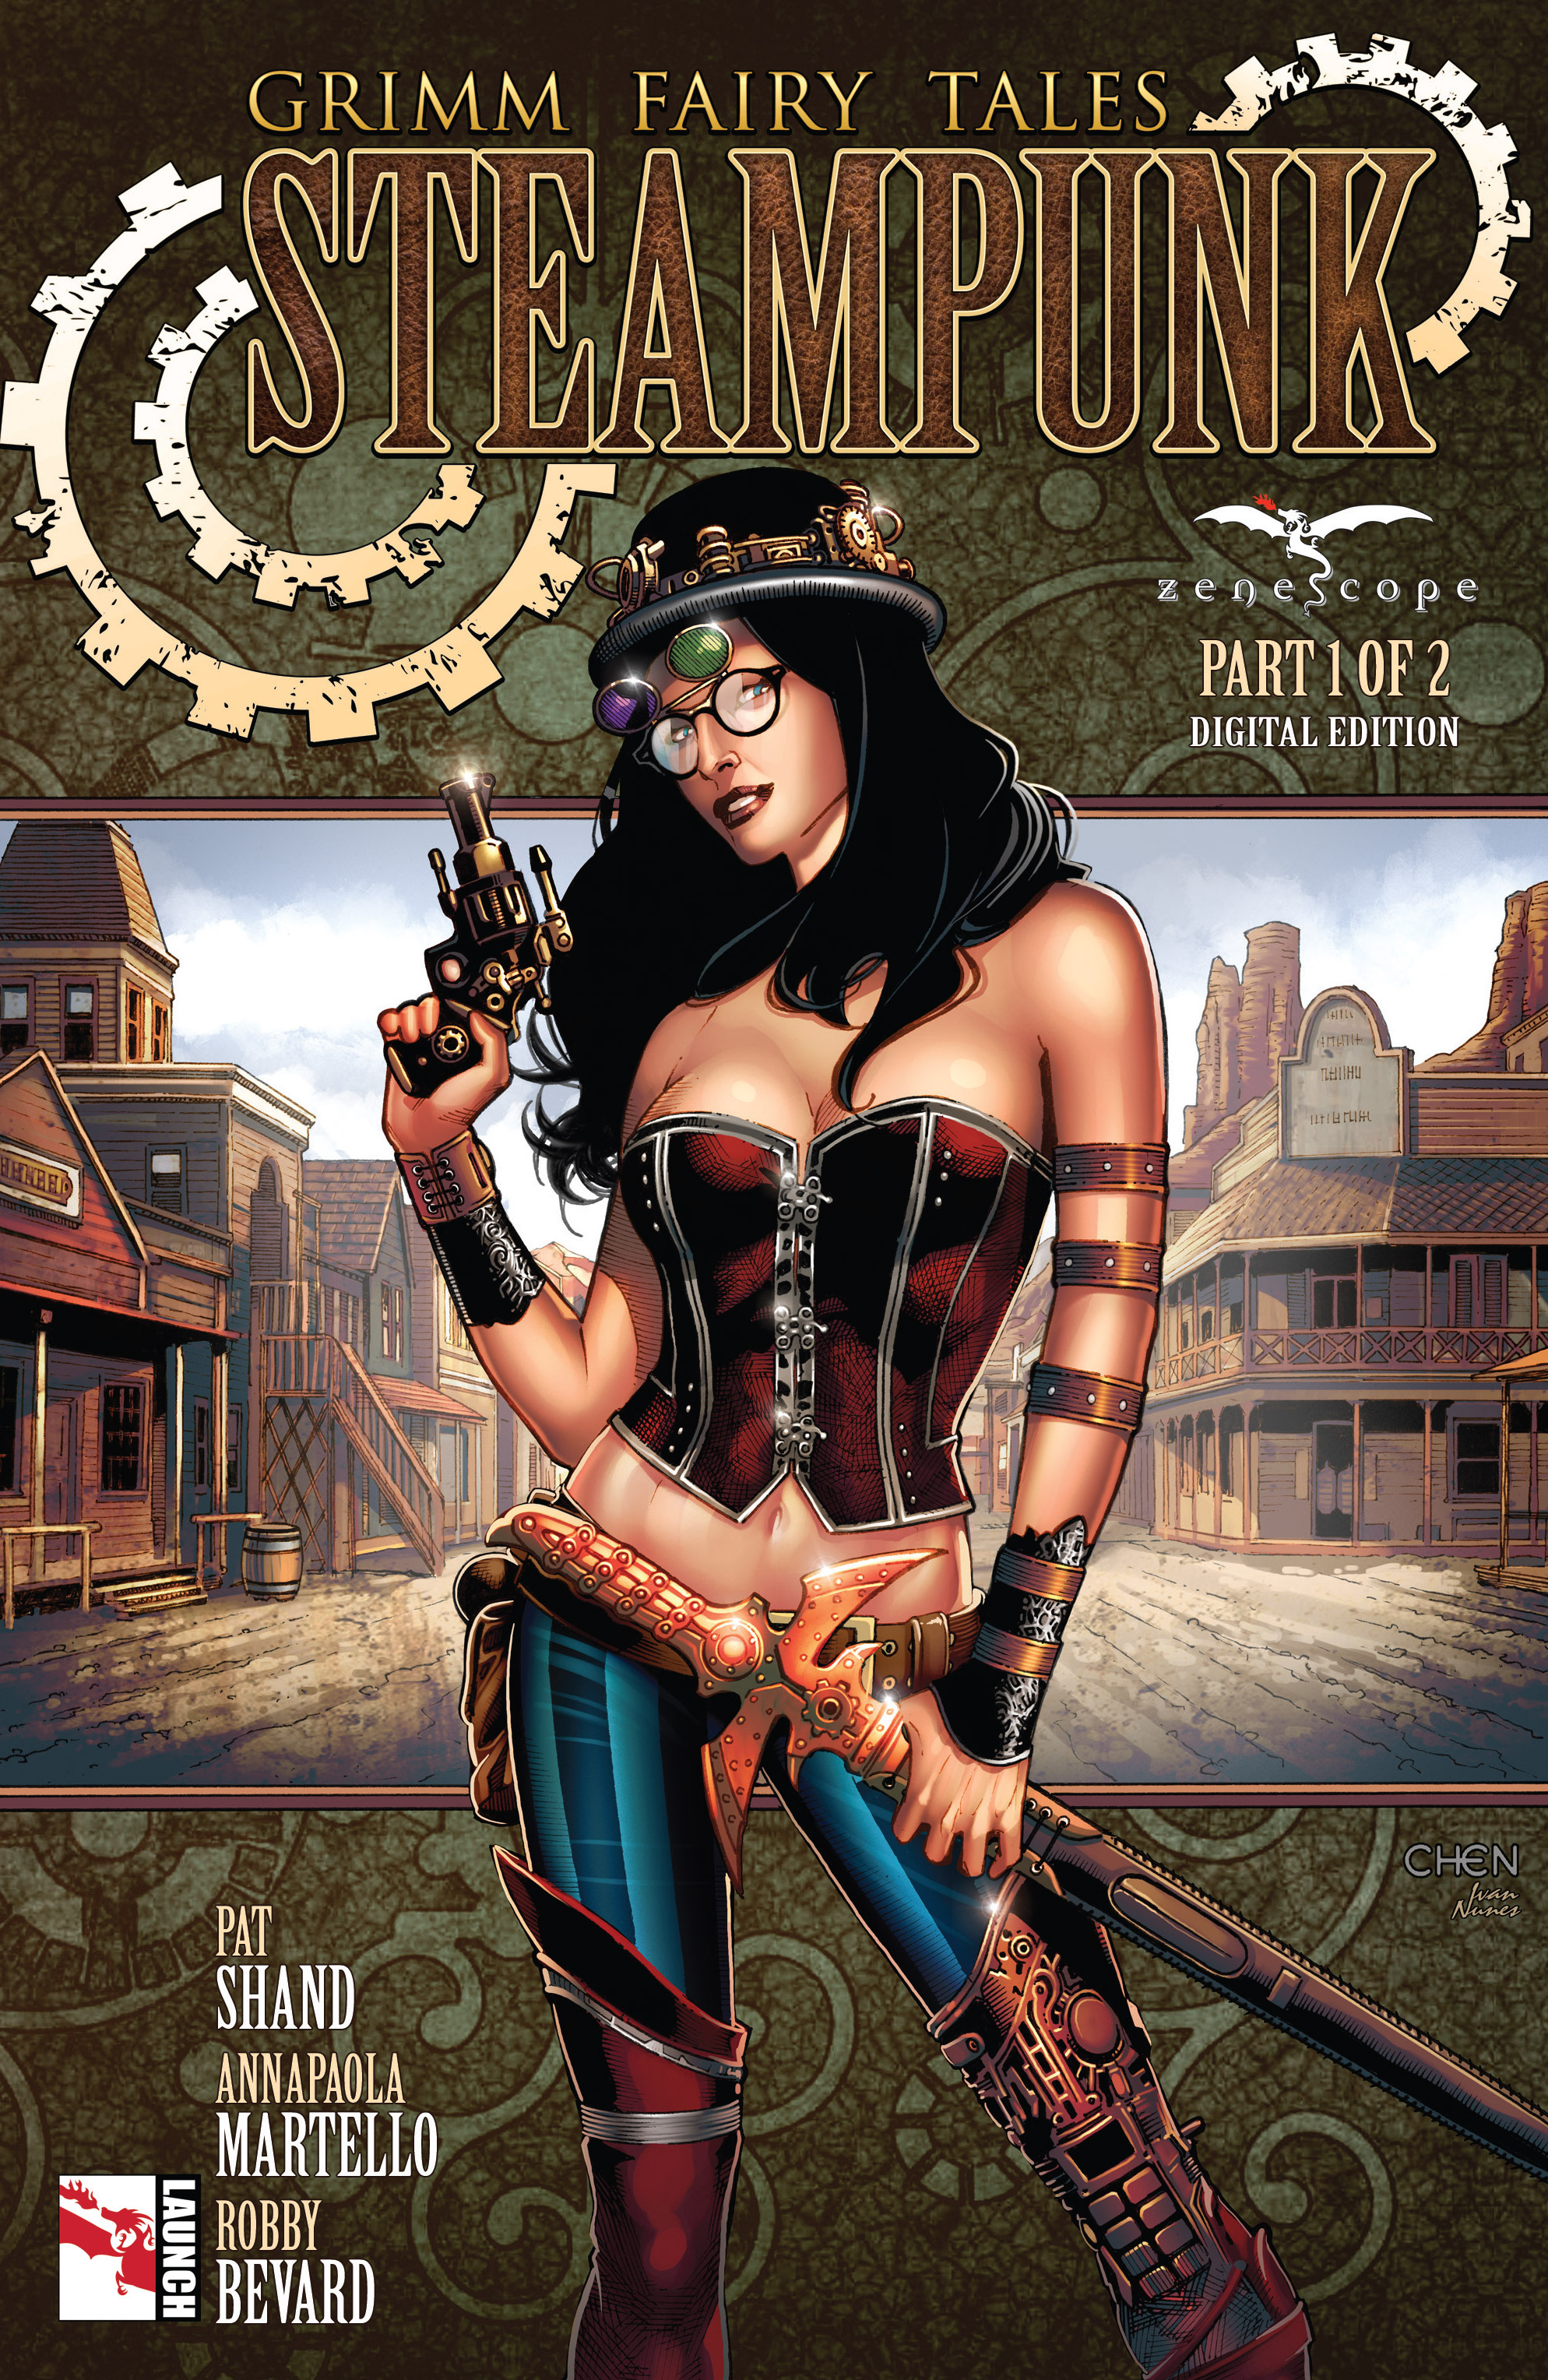 Read online Grimm Fairy Tales Steampunk comic -  Issue #1 - 1